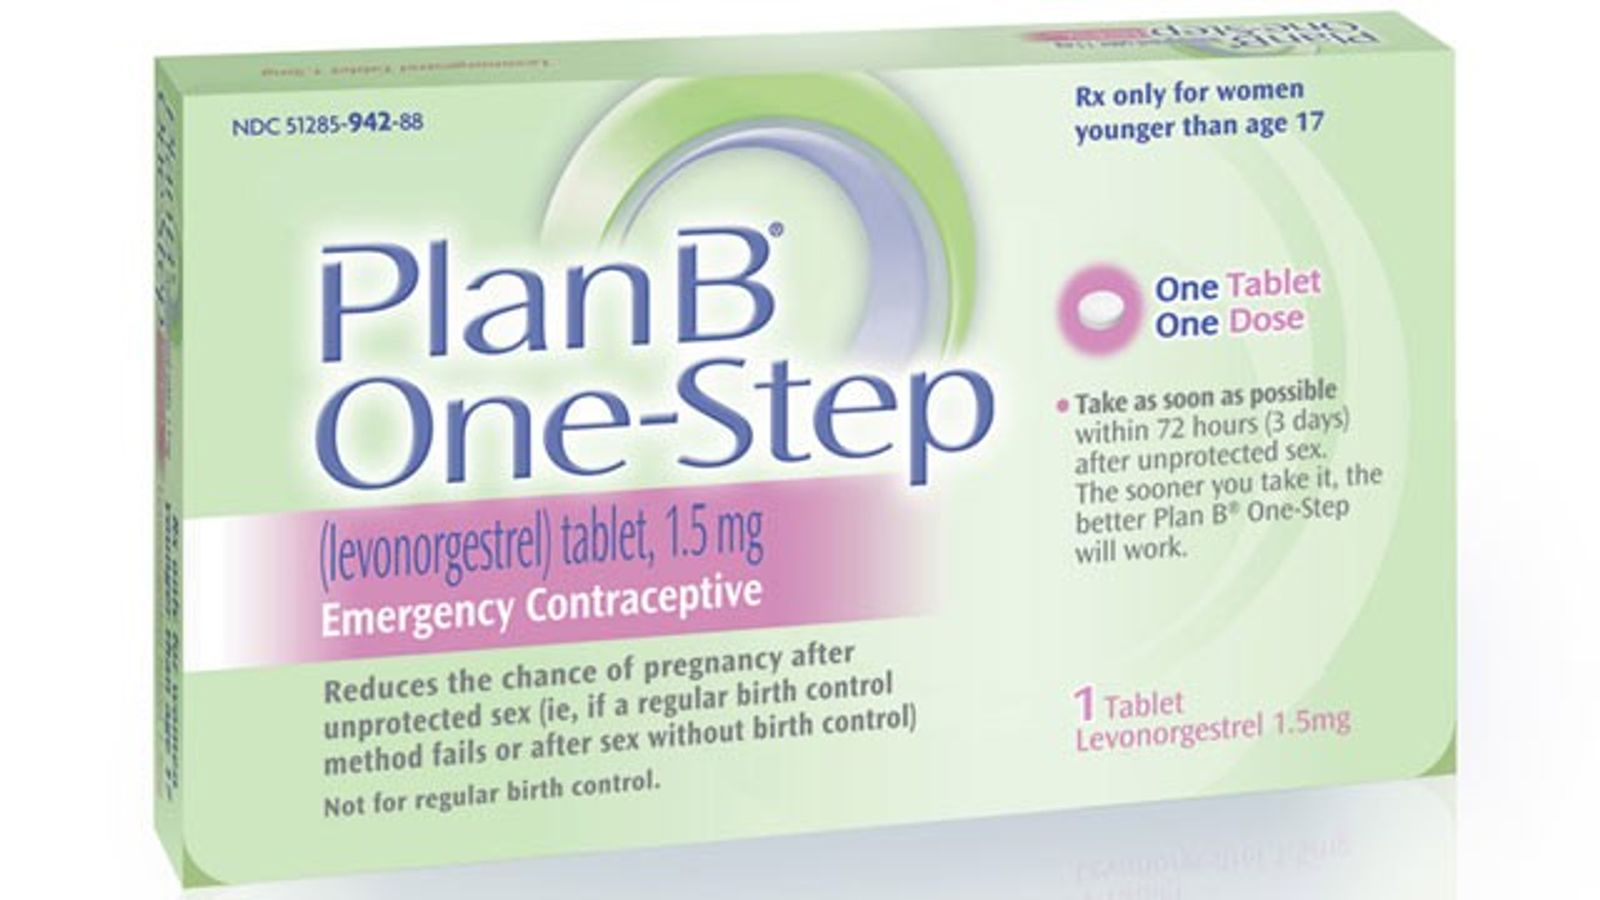 Good News: NY Judge Won't Delay Making Plan B Available for All